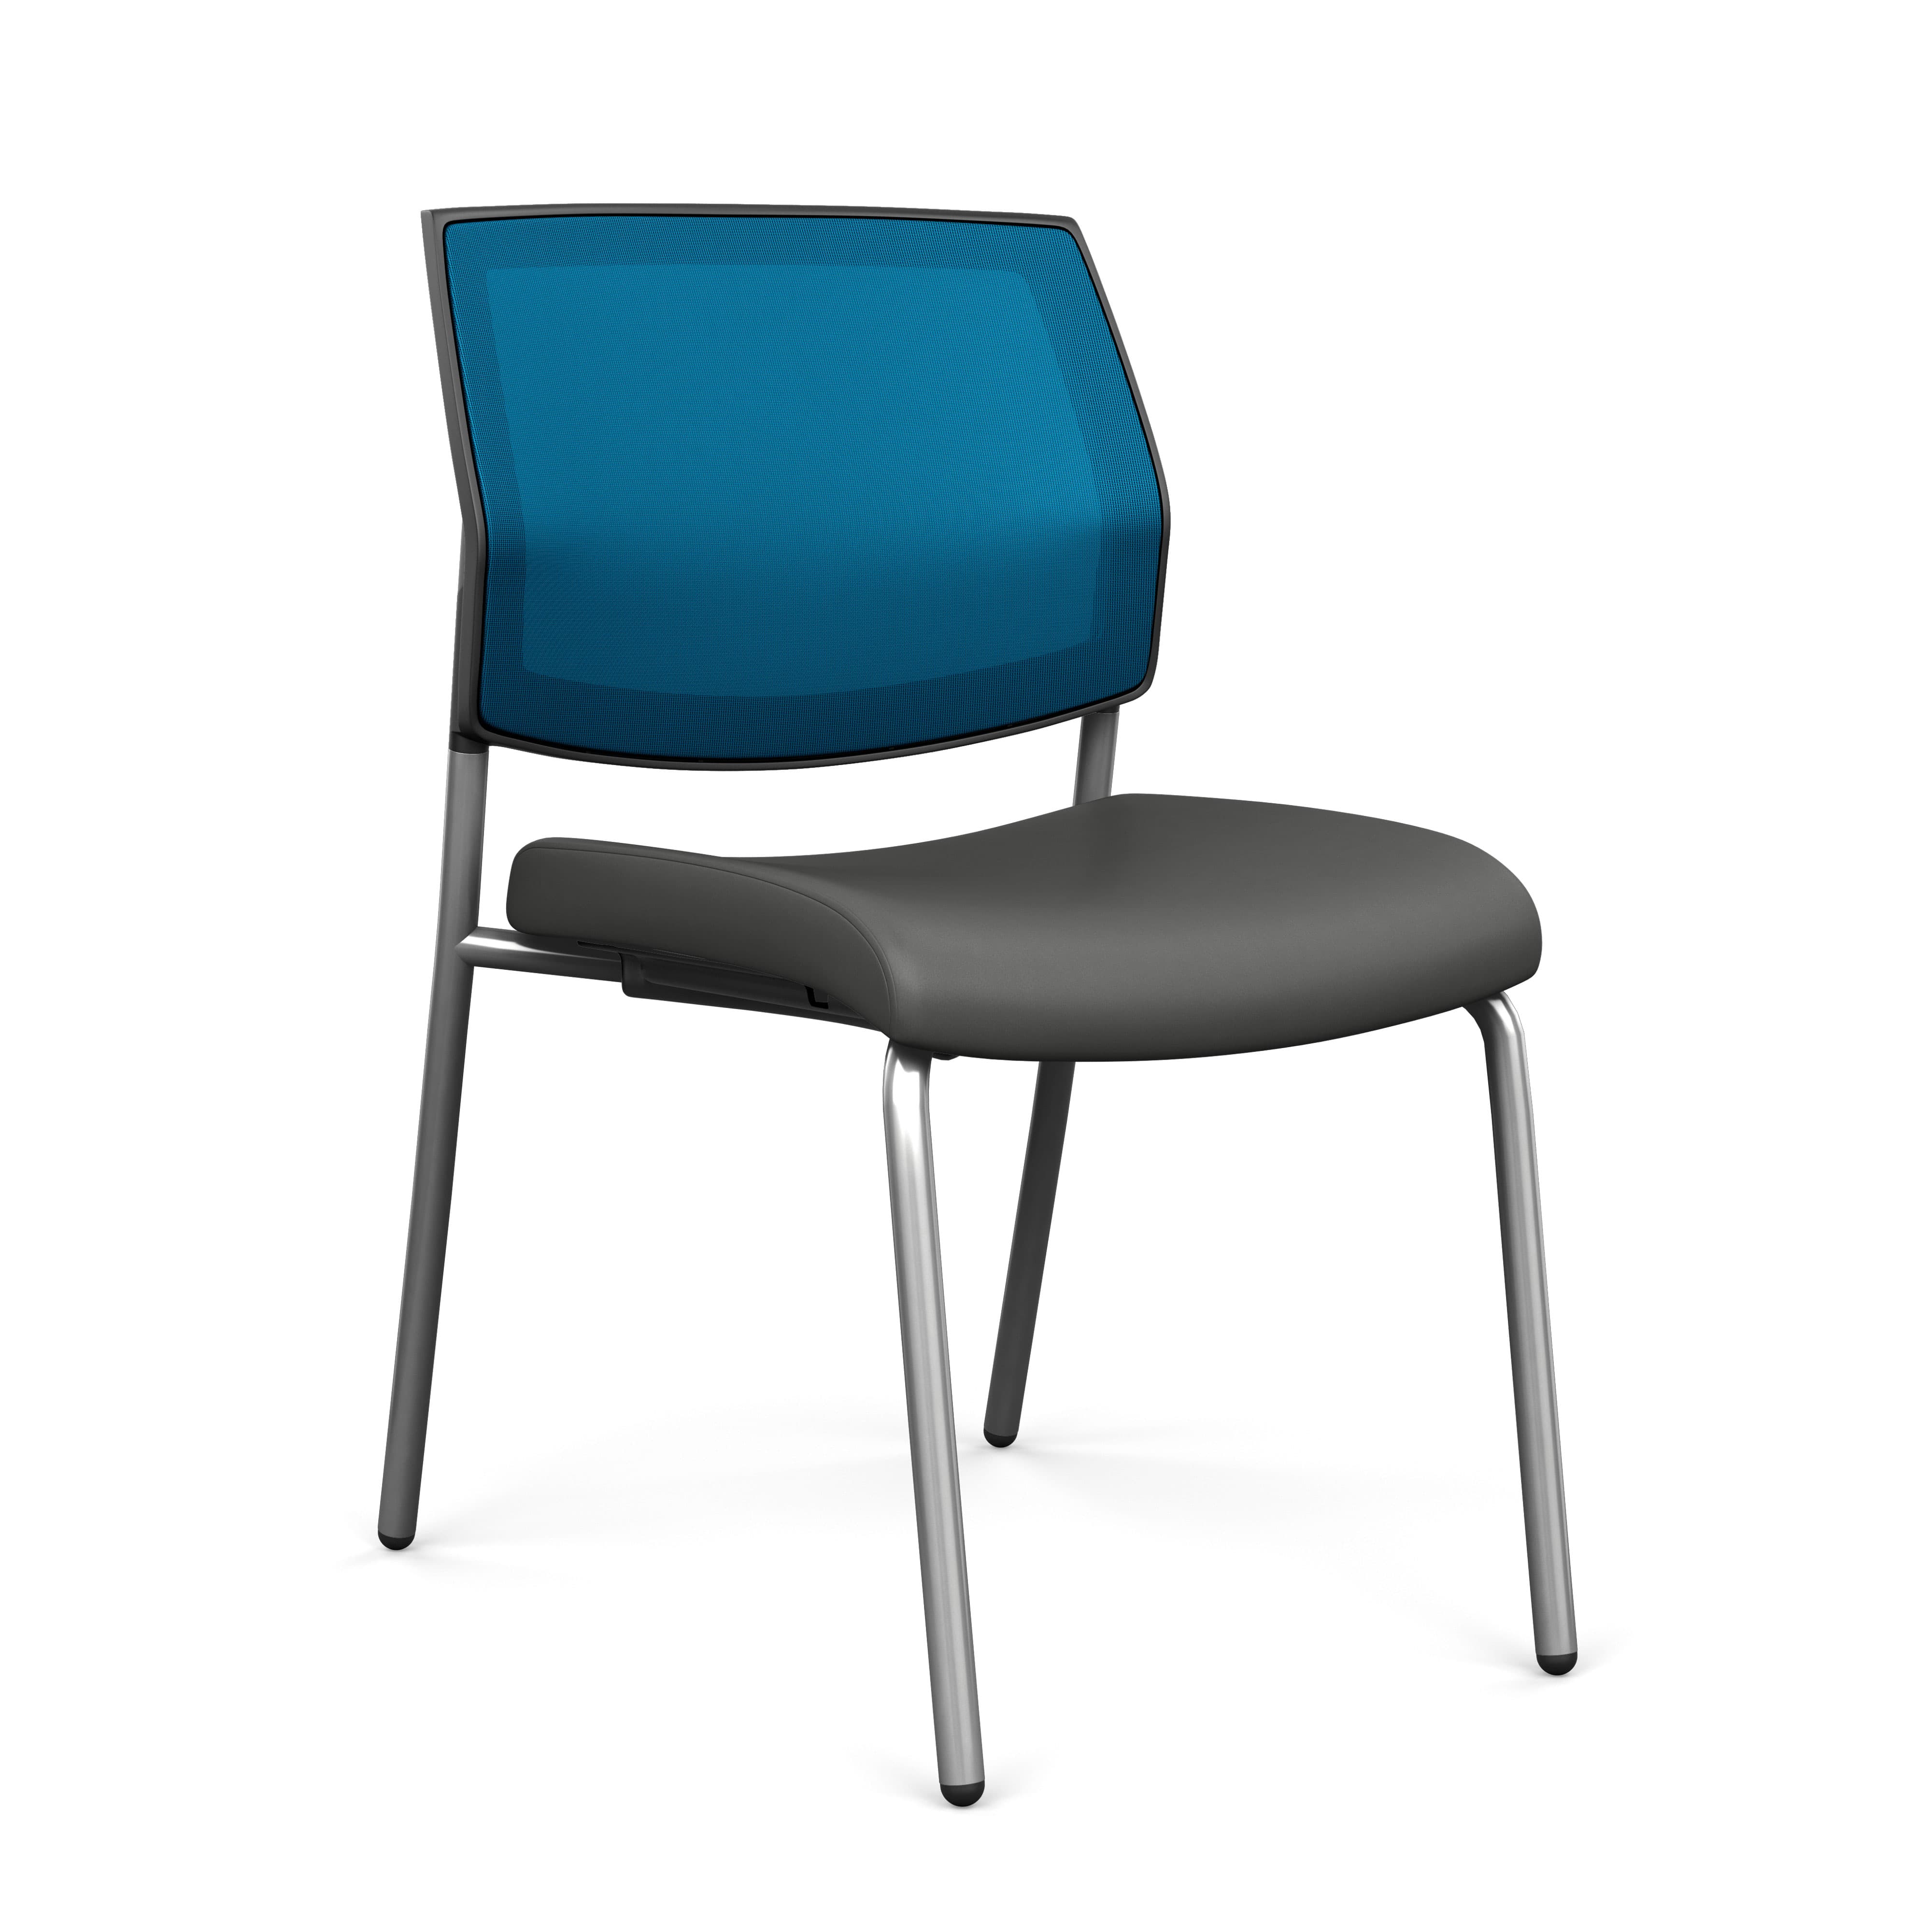  Focus Side Mesh Back Chair with Arms